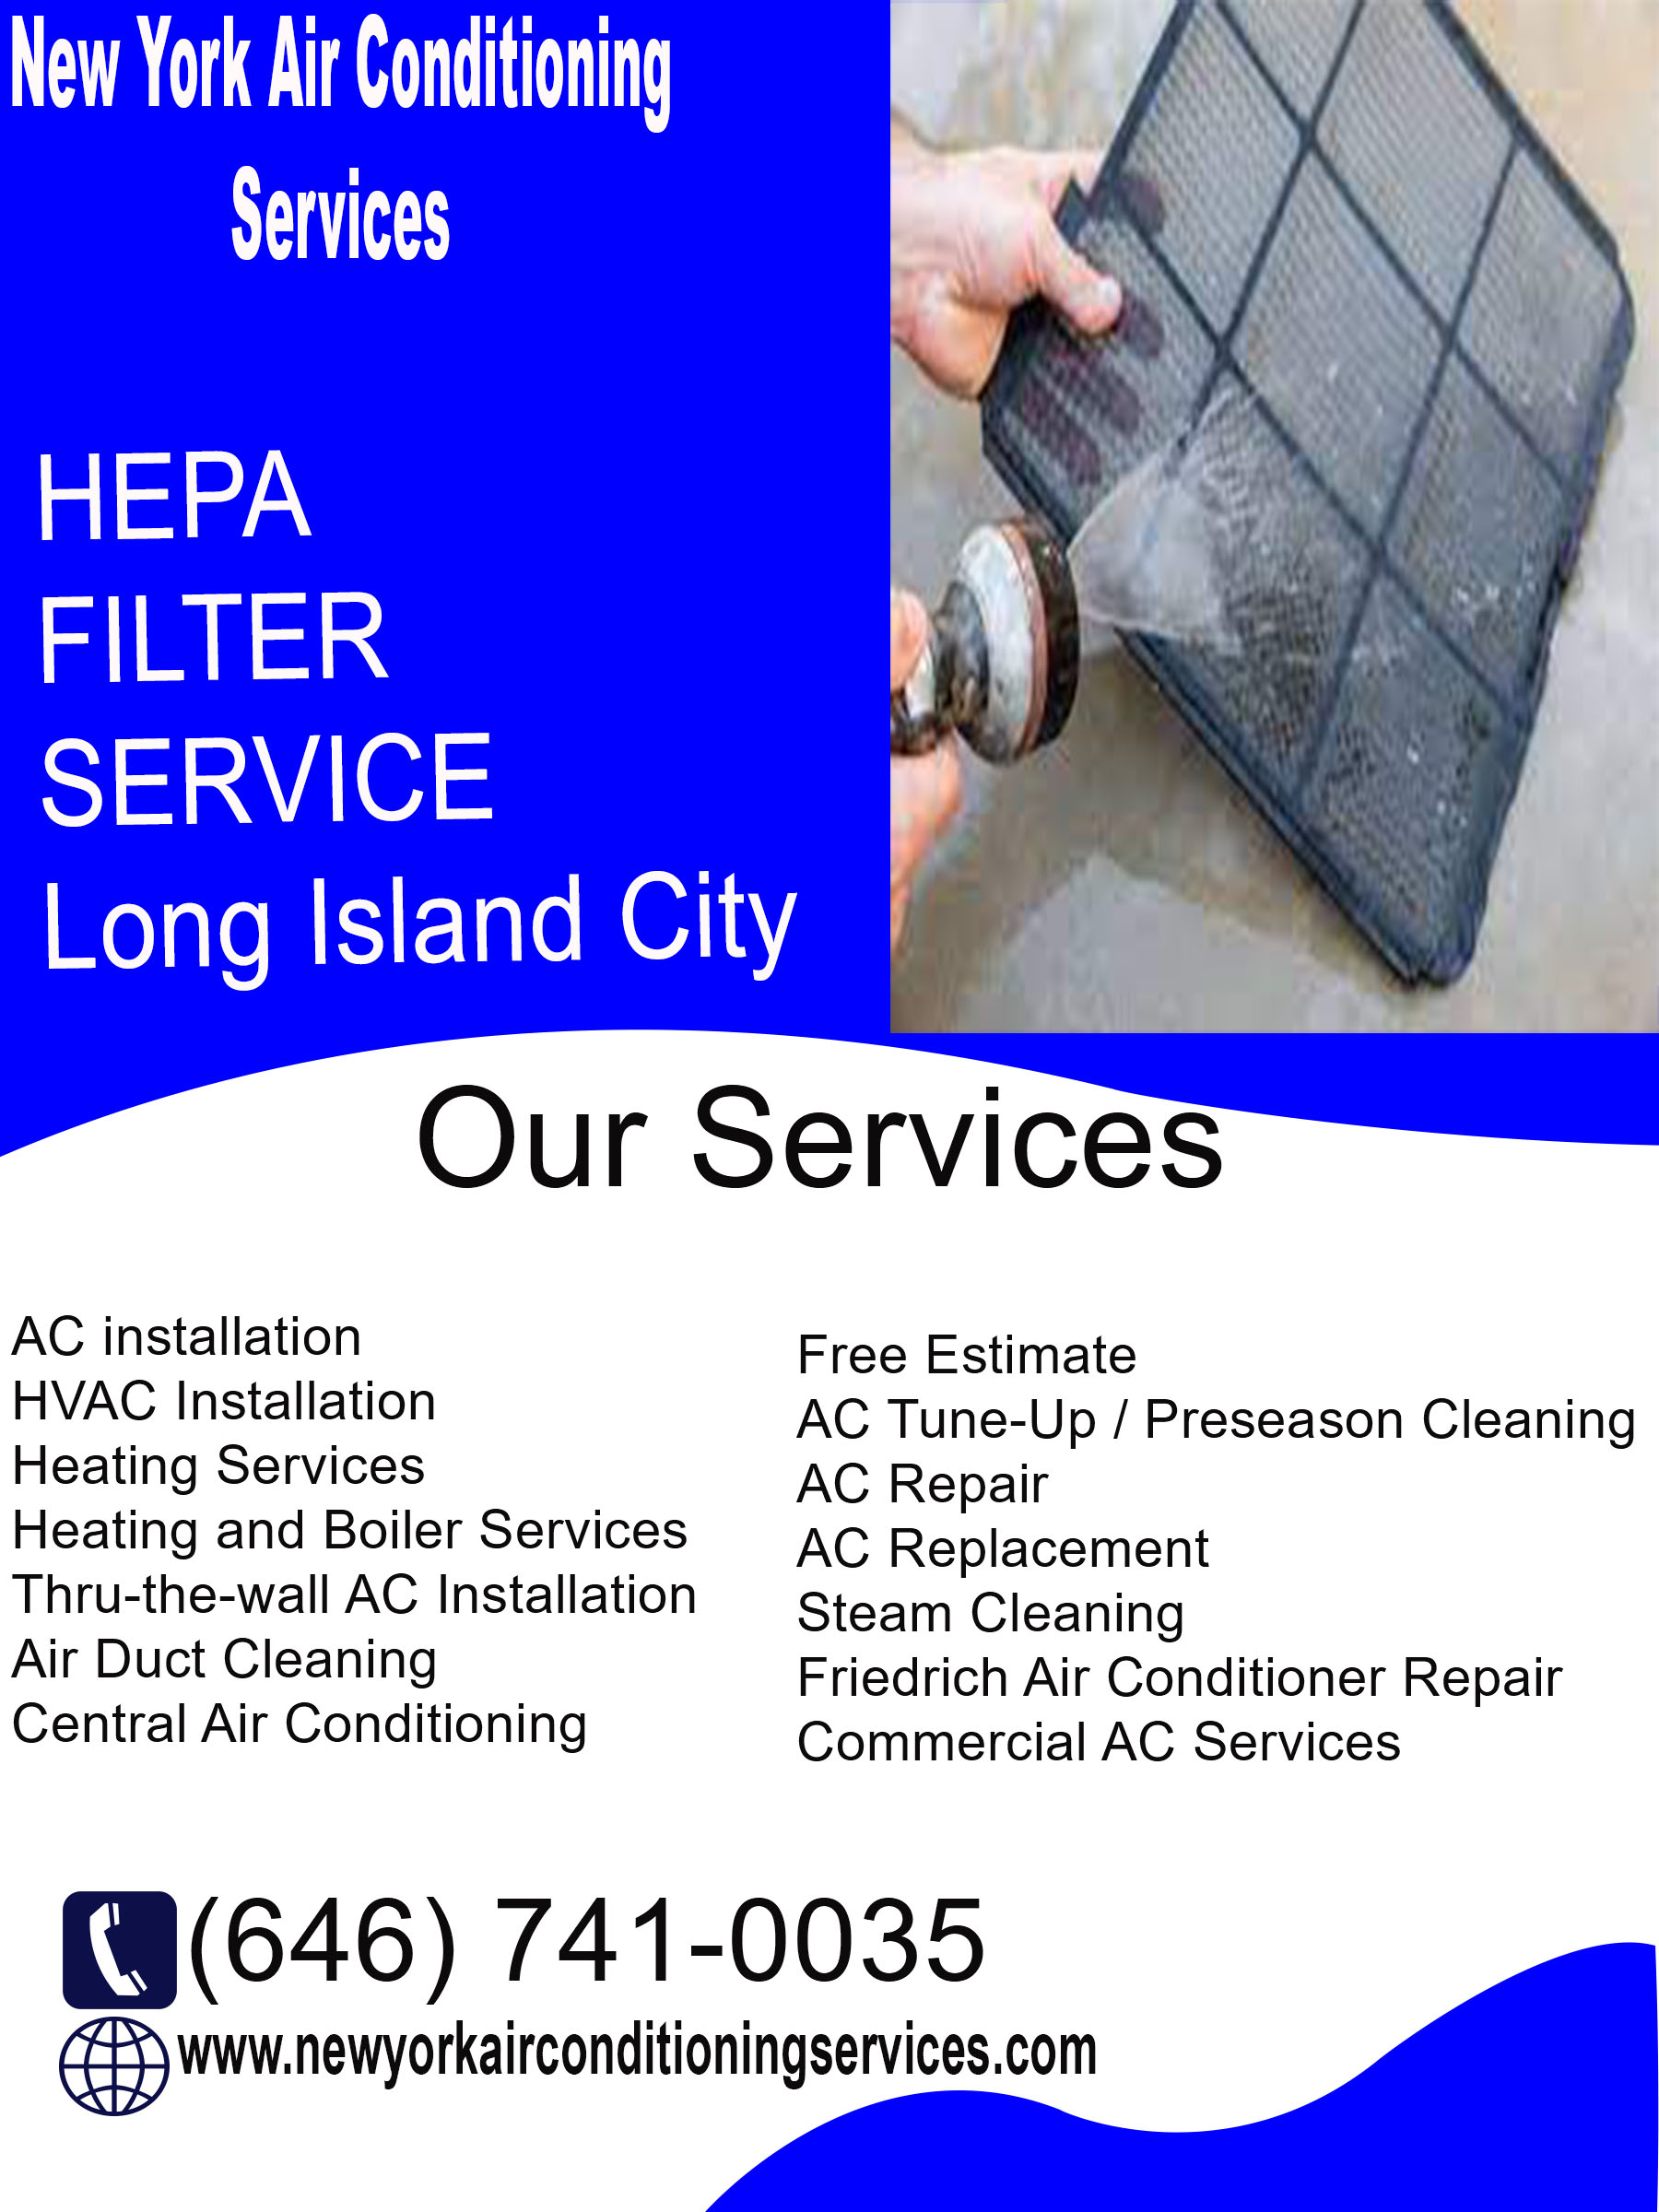 New York Air Conditioning Services - New York - New York ID1542246